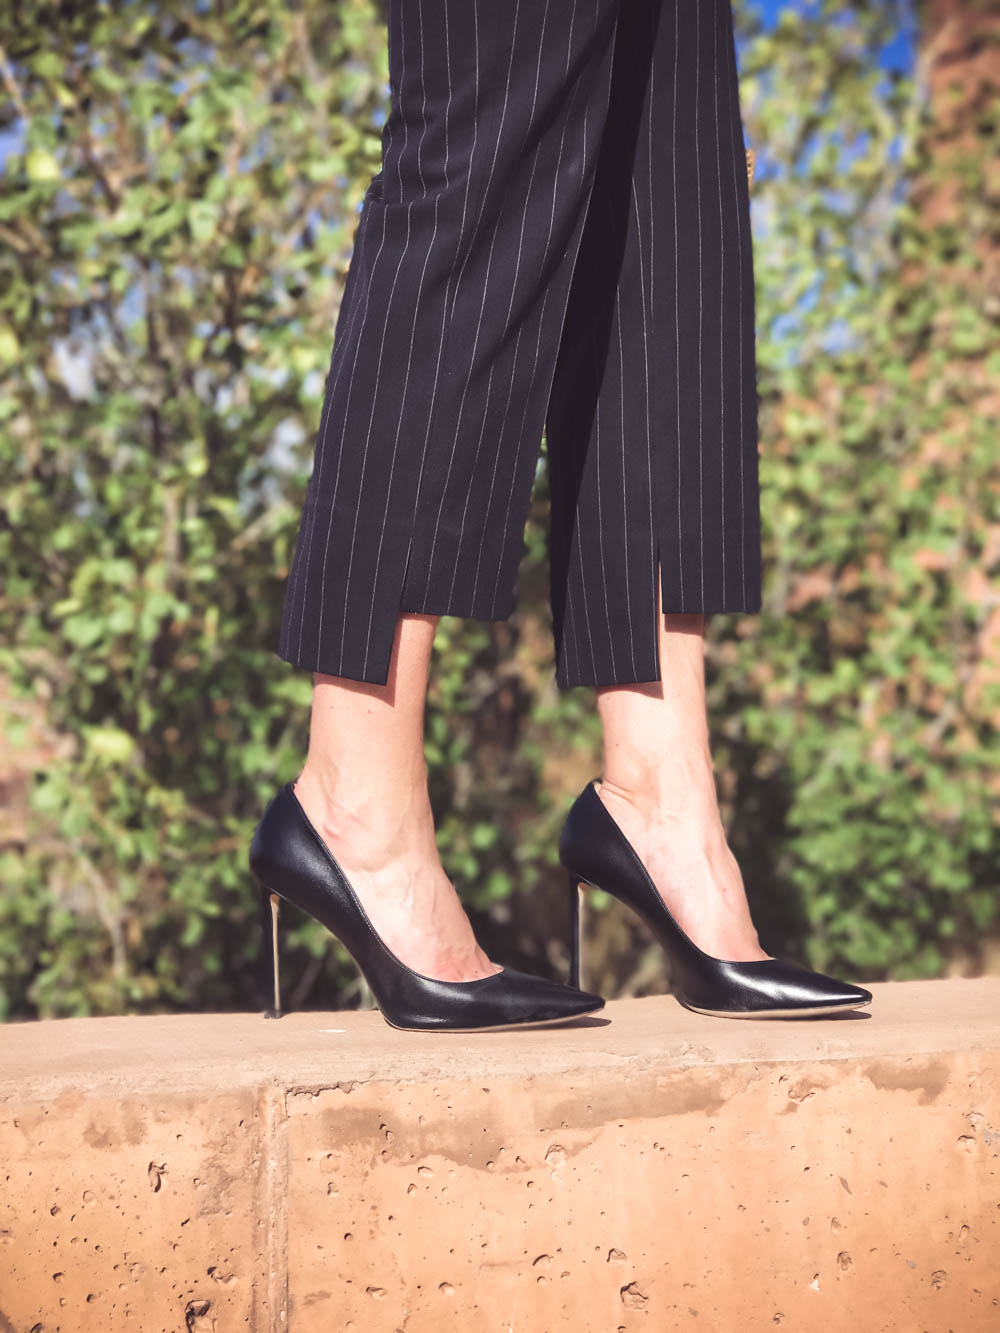 Taking blog pictures featuring blurry background, using iPhone X in portrait mode, picture of black Jimmy Choo pumps